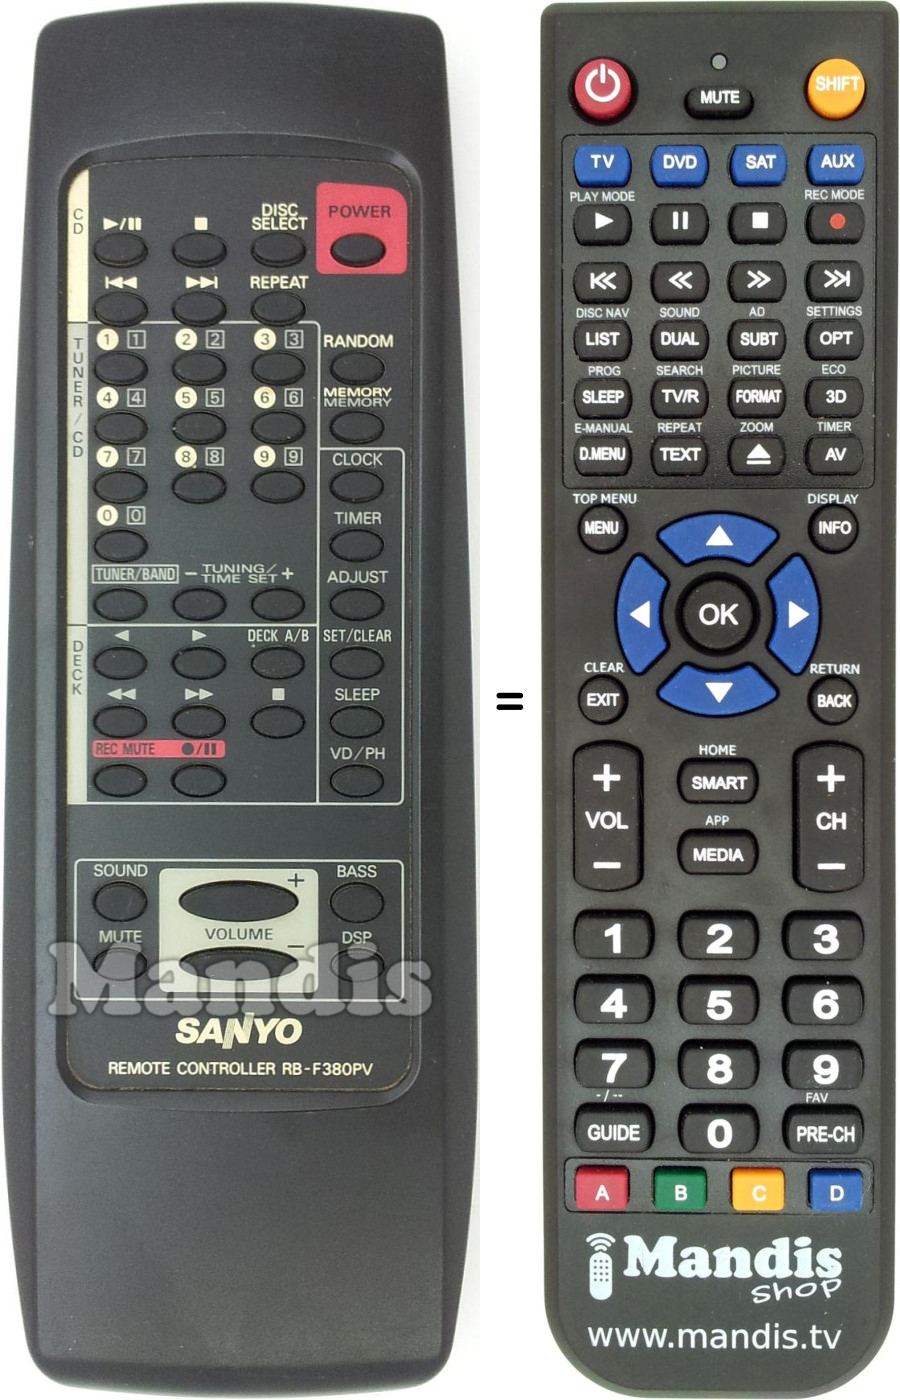 Replacement remote control RB-F380PV